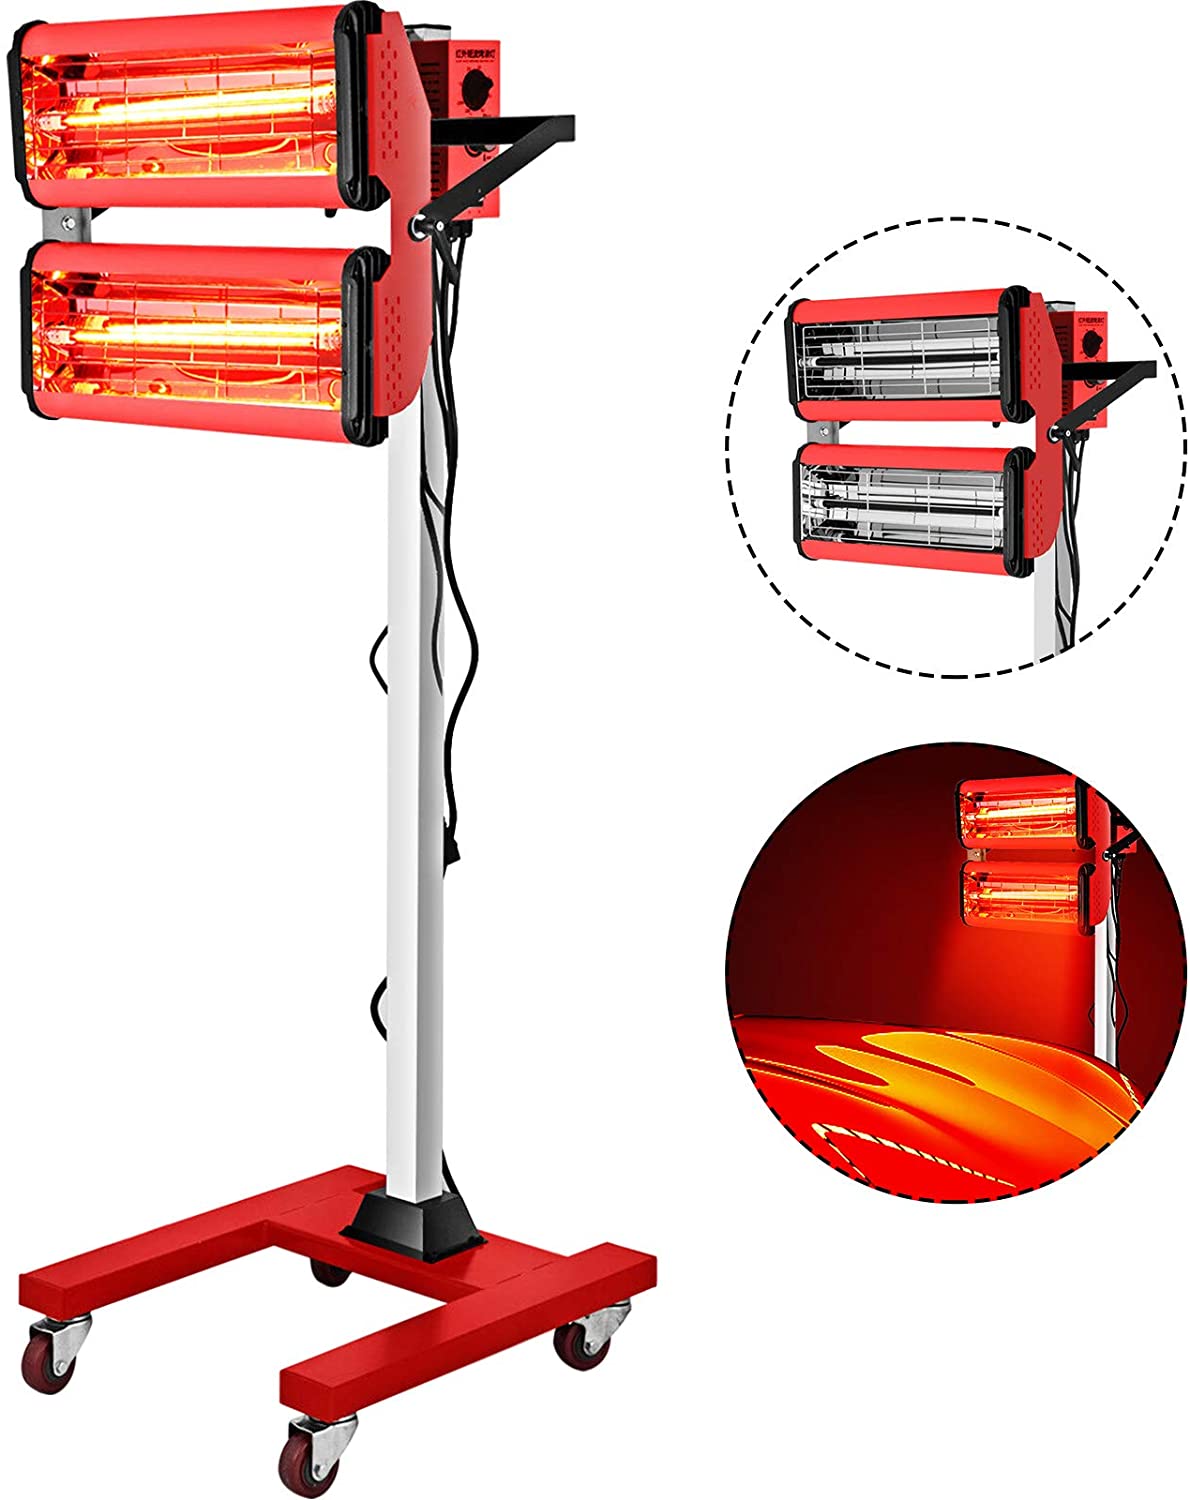 2000W DUAL LAMP INFARED HEATER WITH STAND - 2X 1000W INFARED HEATERS